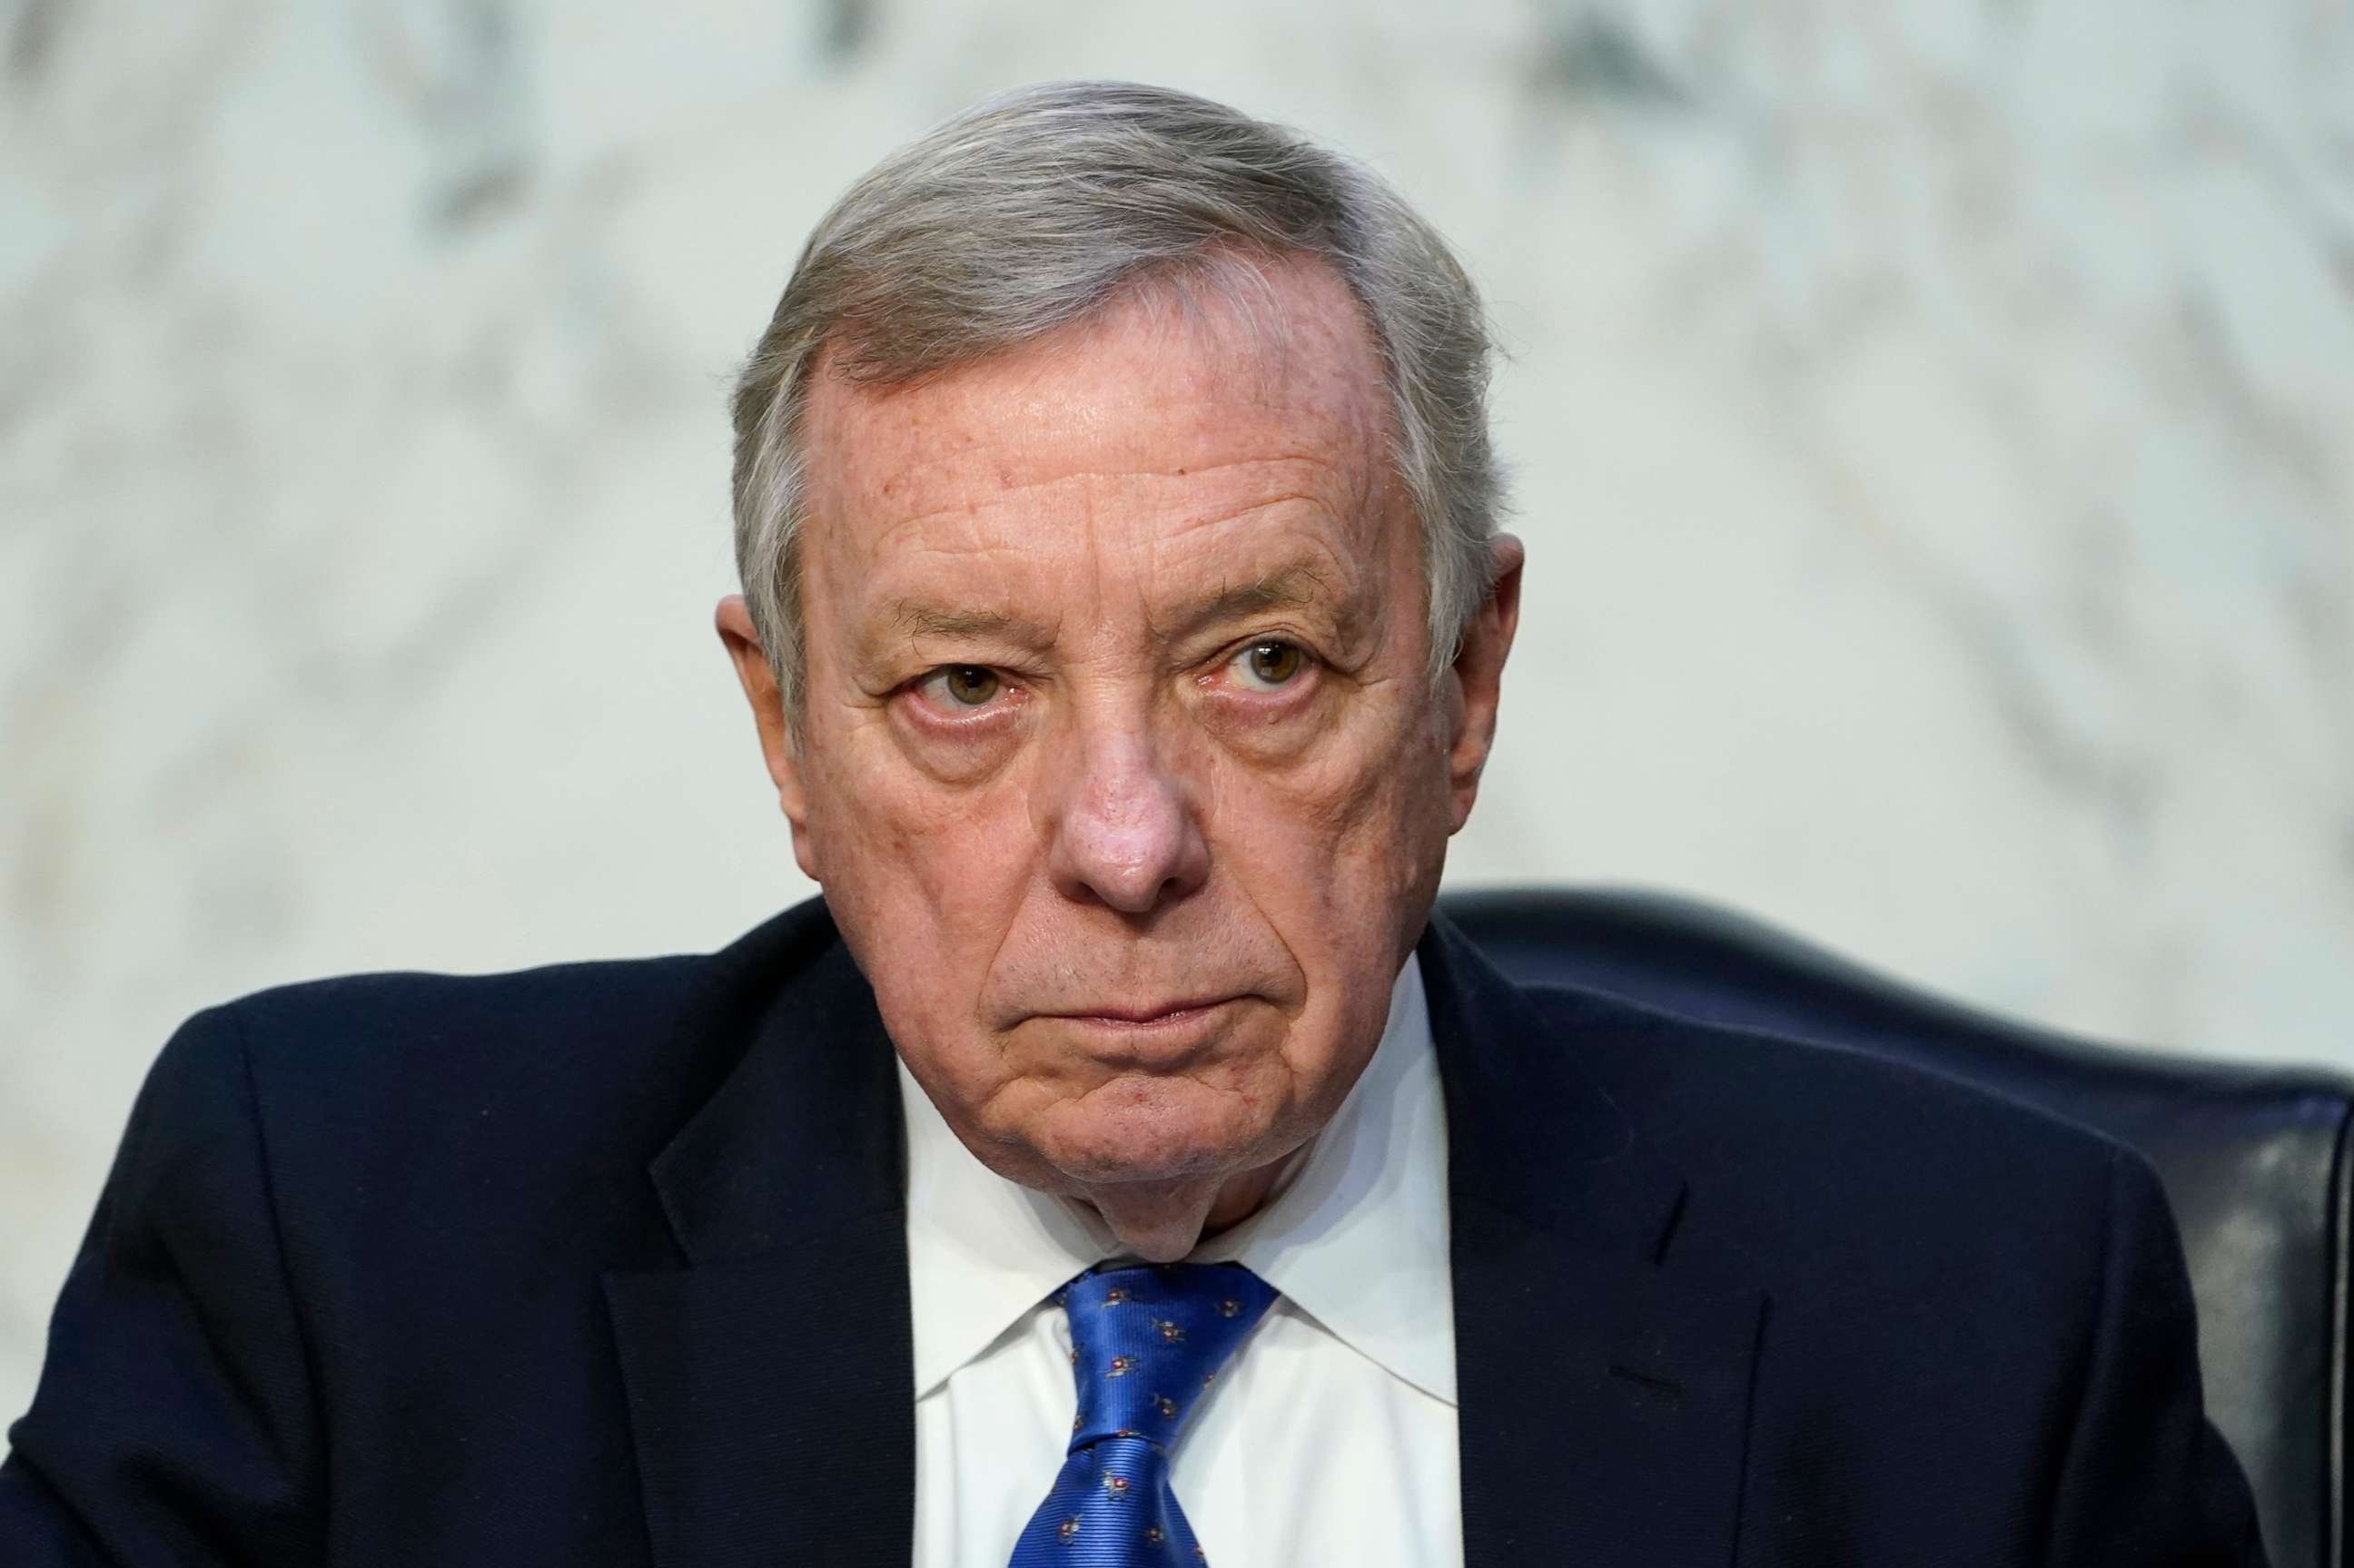 PHOTO: Senate Judiciary Committee chairman Sen. Dick Durbin listens during a committee business meeting on Capitol Hill in Washington, D.C., on March 28, 2022.